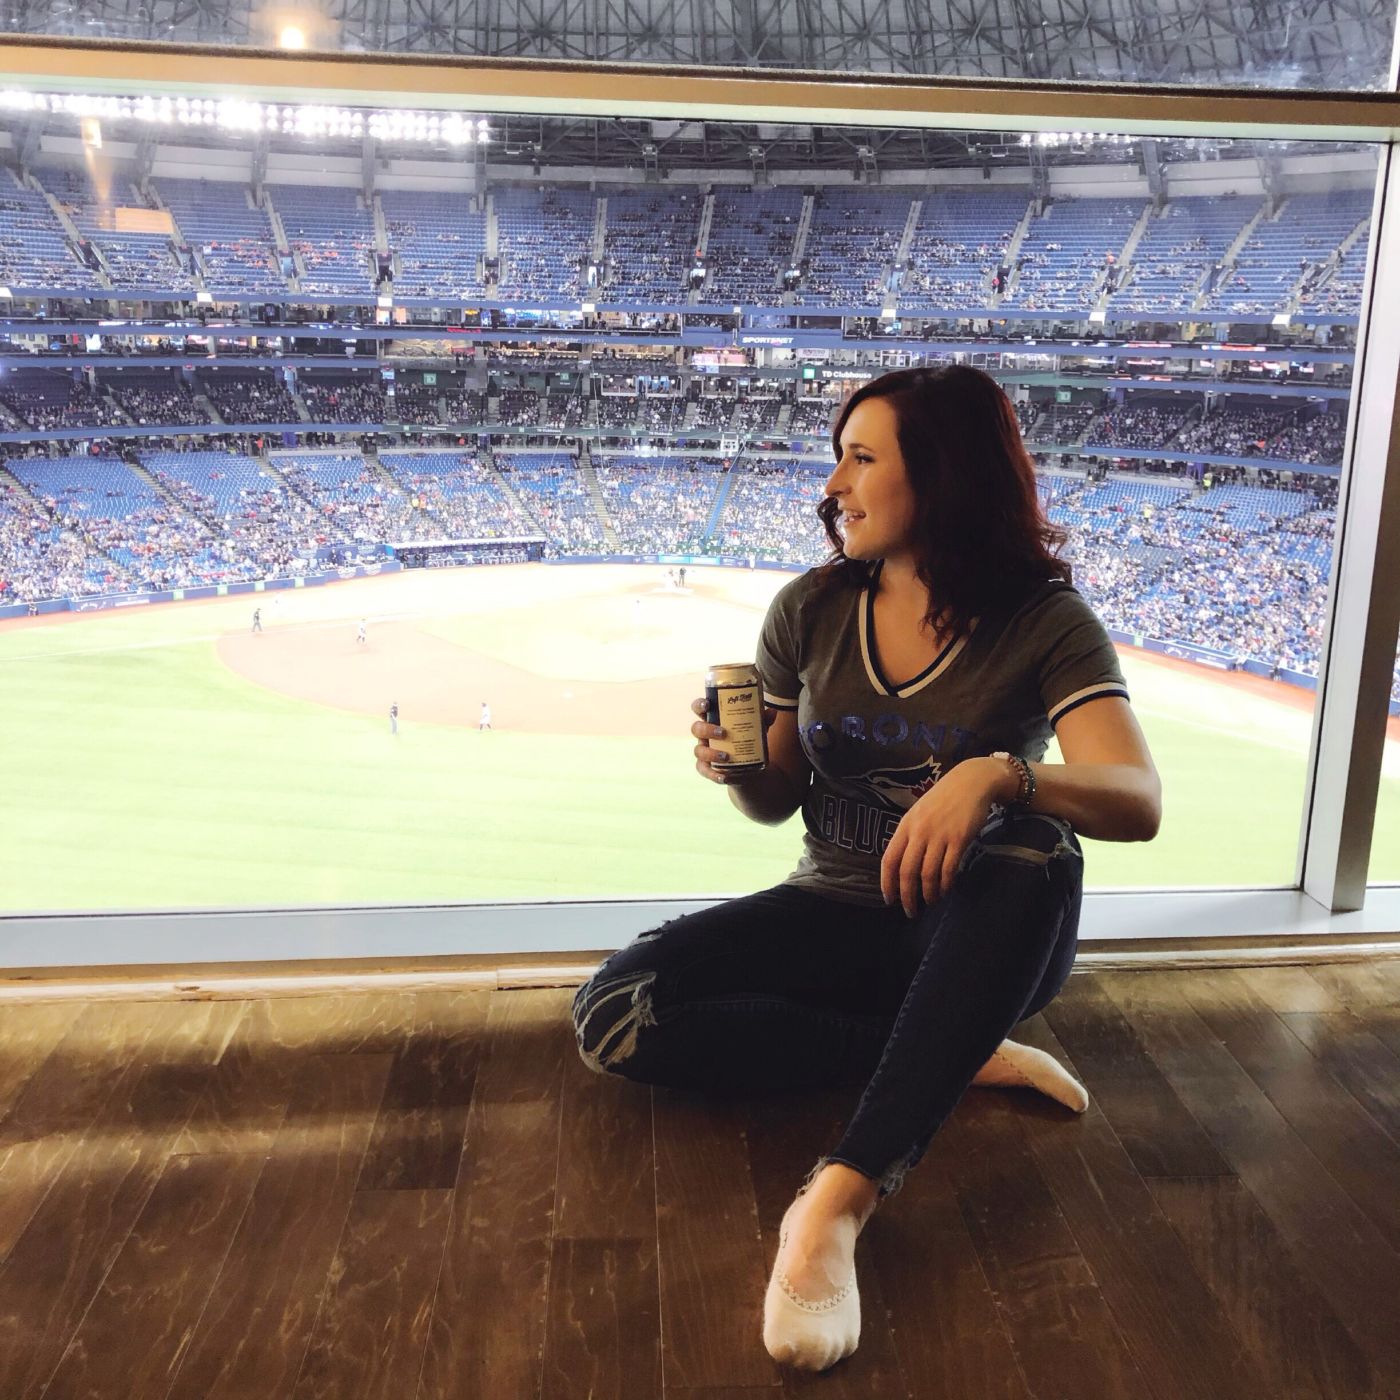 toronto marriott city centre, rogers centre hotel, blue jays hotel, where to stay in toronto, toronto blue jays game day, what to do before blue jays game, toronto sports, toronto tourism, best toronto hotels, hotel to watch the baseball game